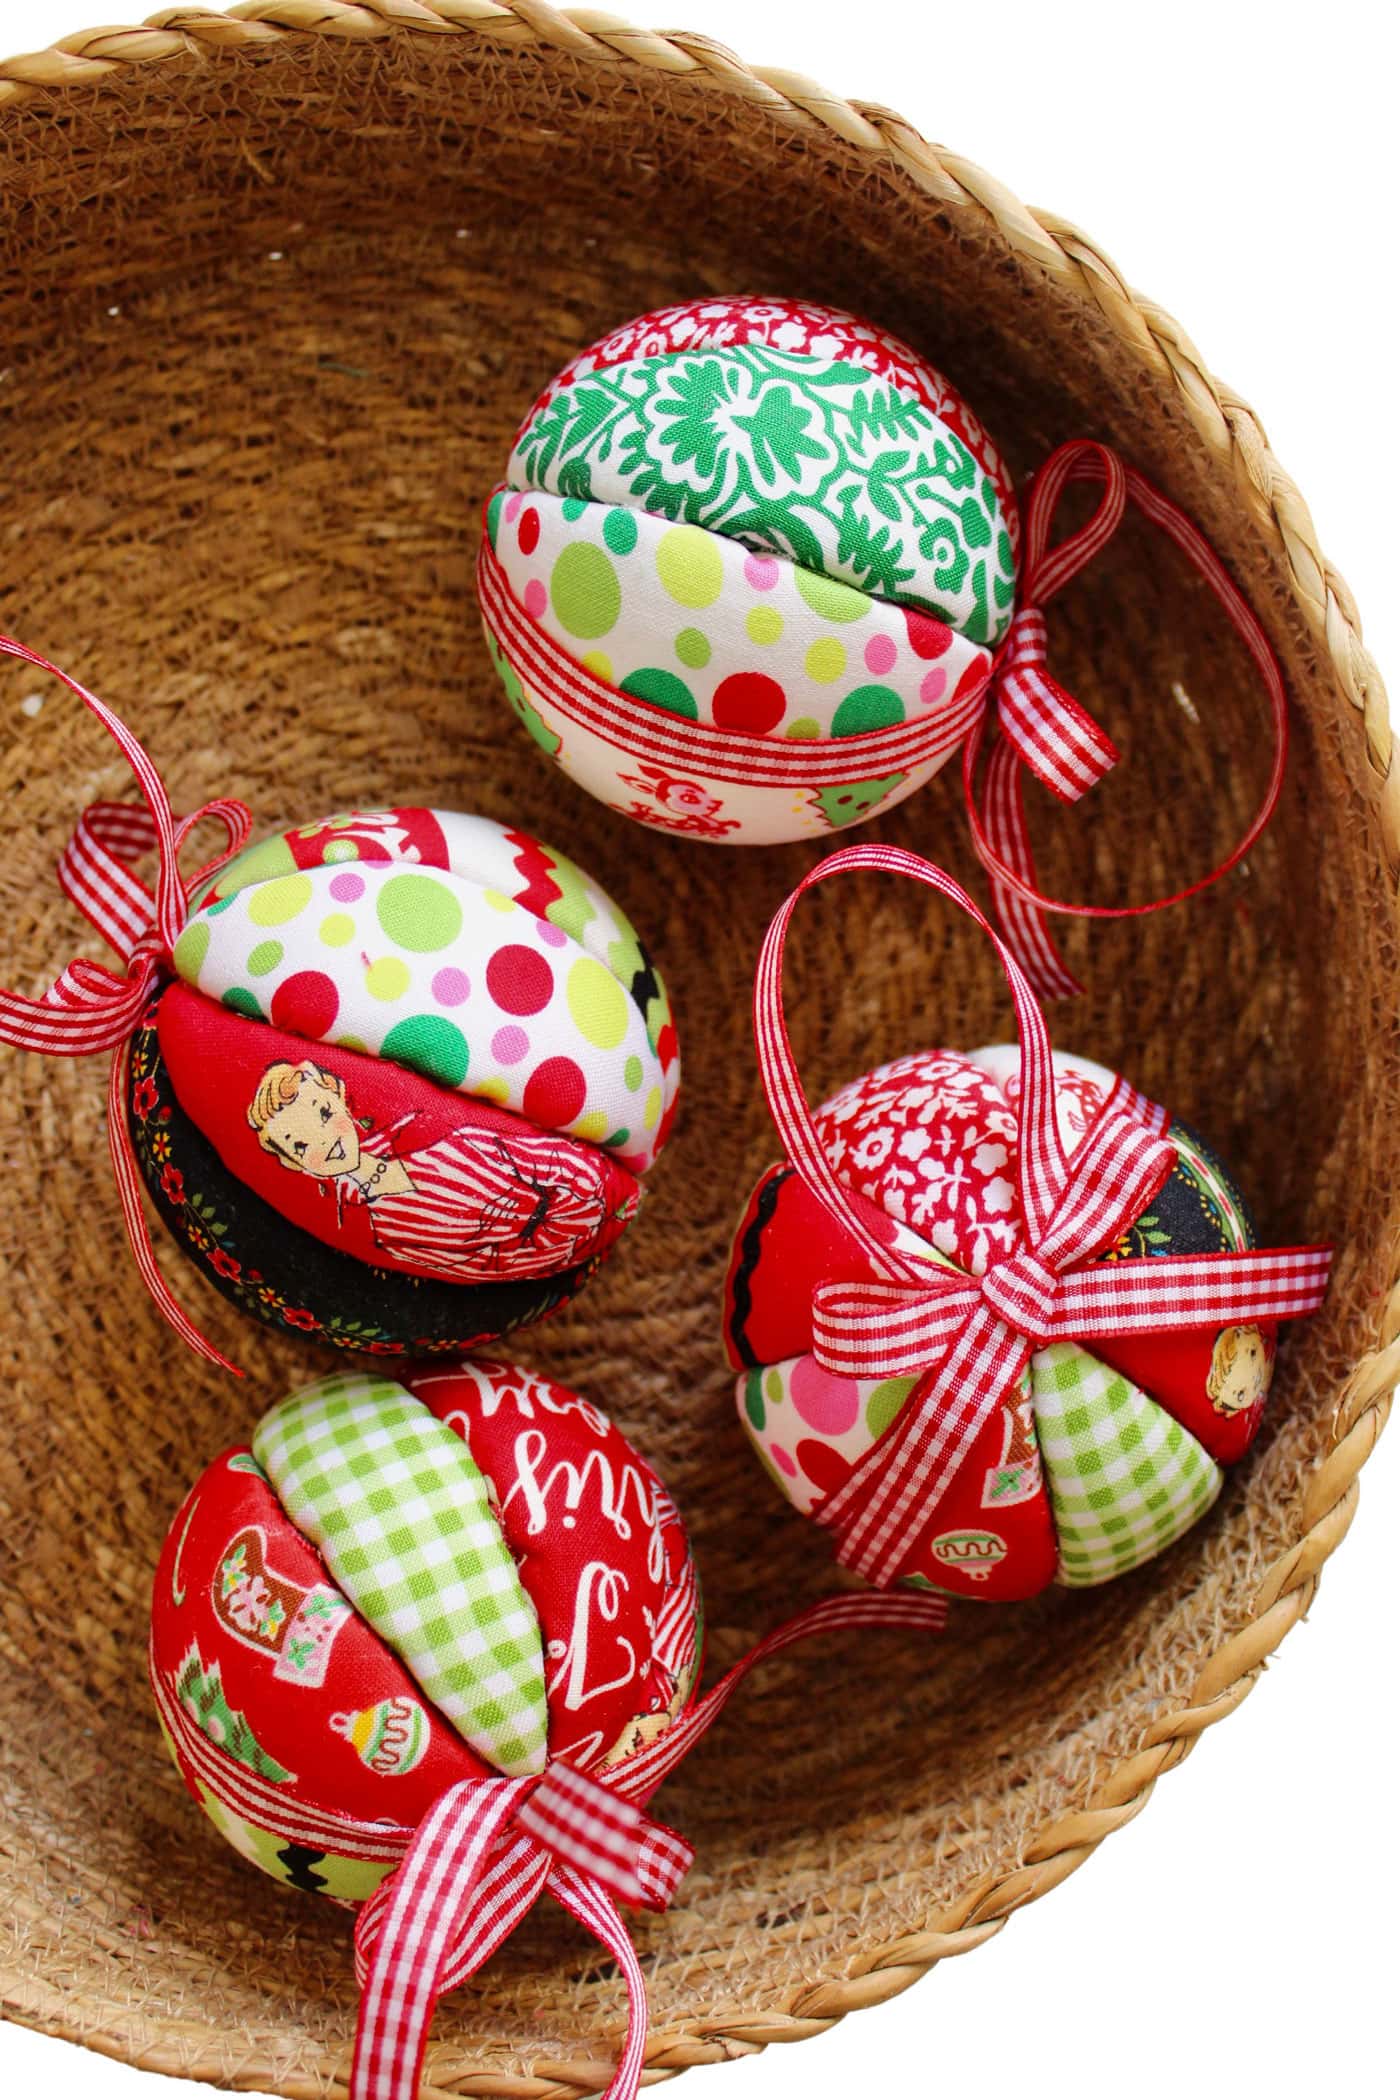 red, white and green fabric christmas ornament with bow in basket